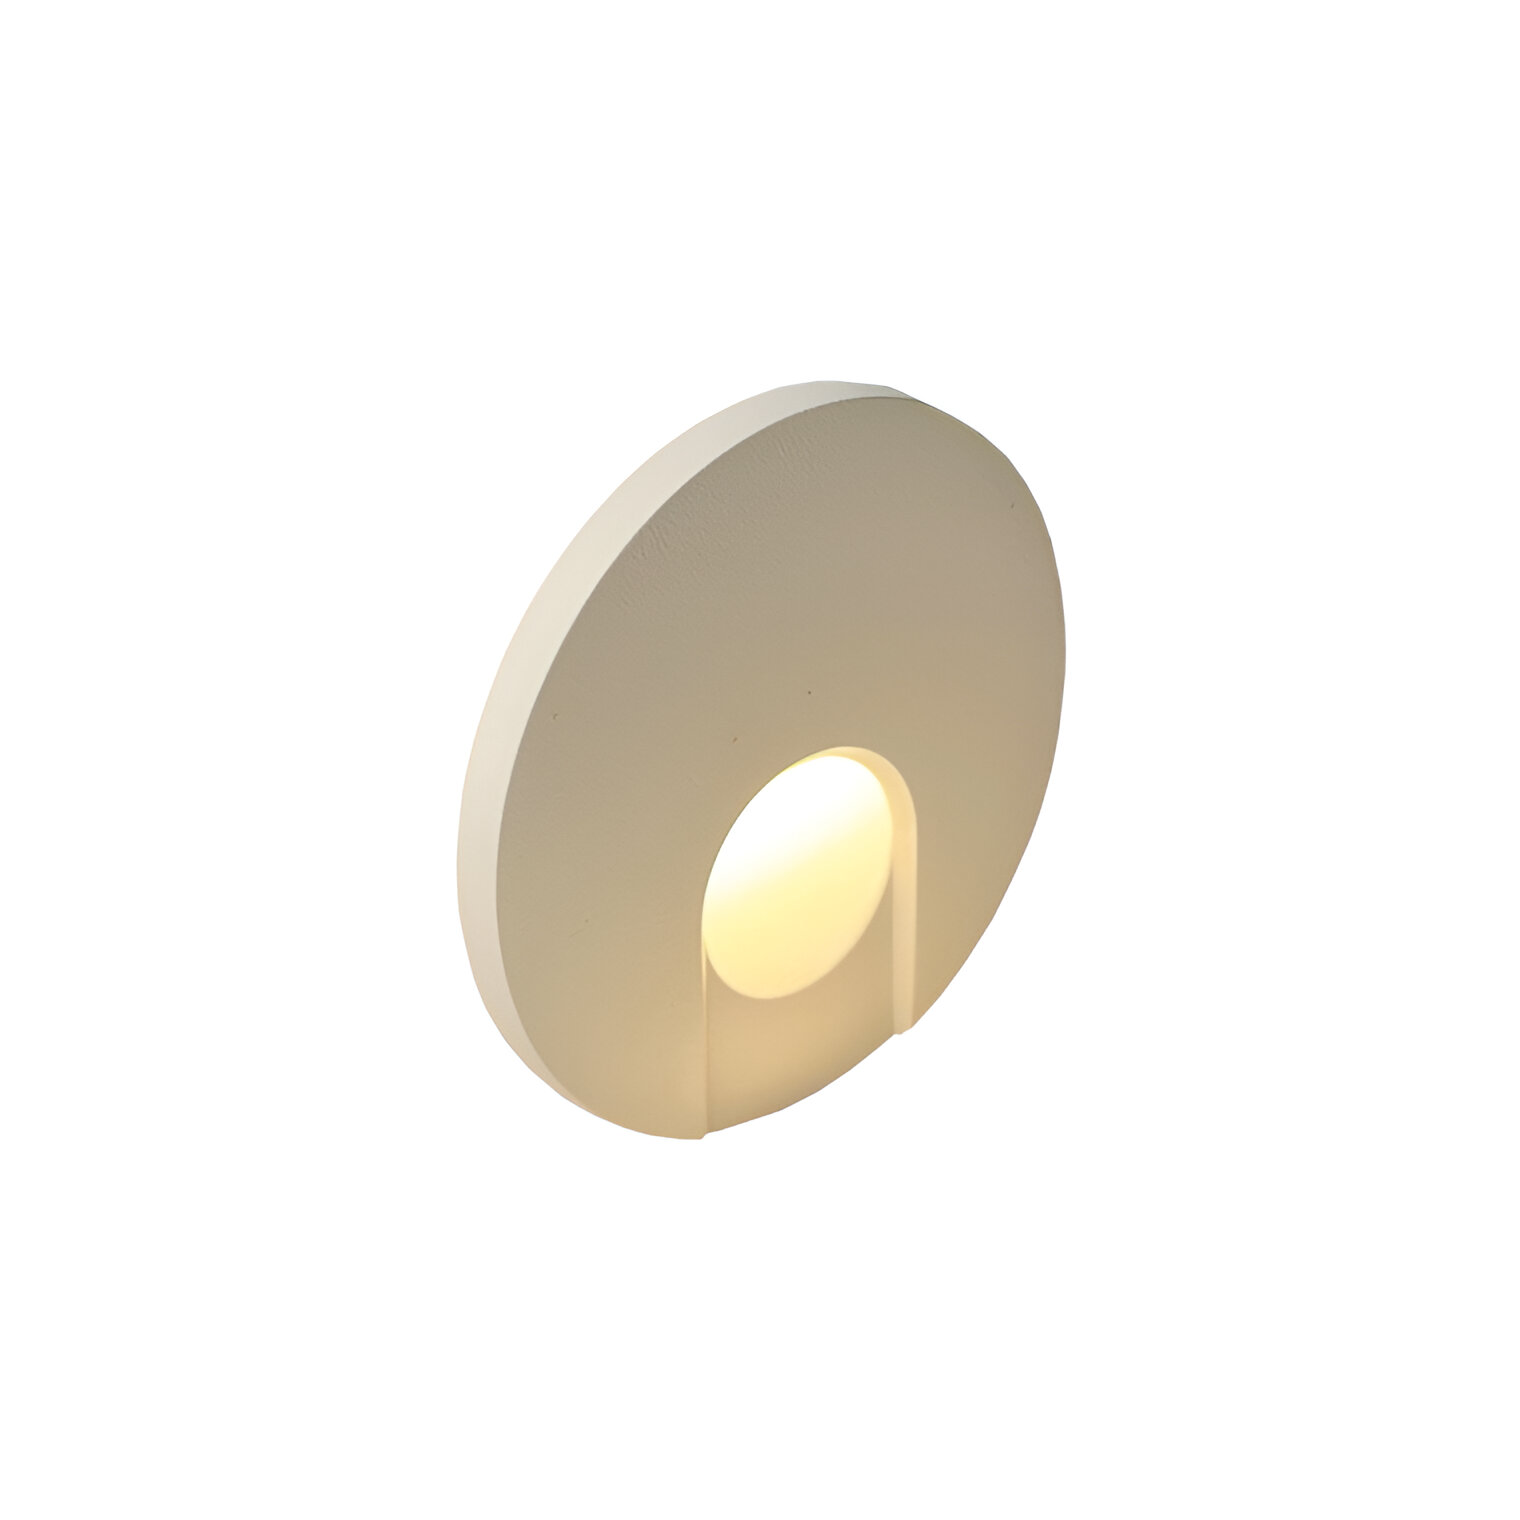 Product image of Magna LED Stair Light Round White with Light On